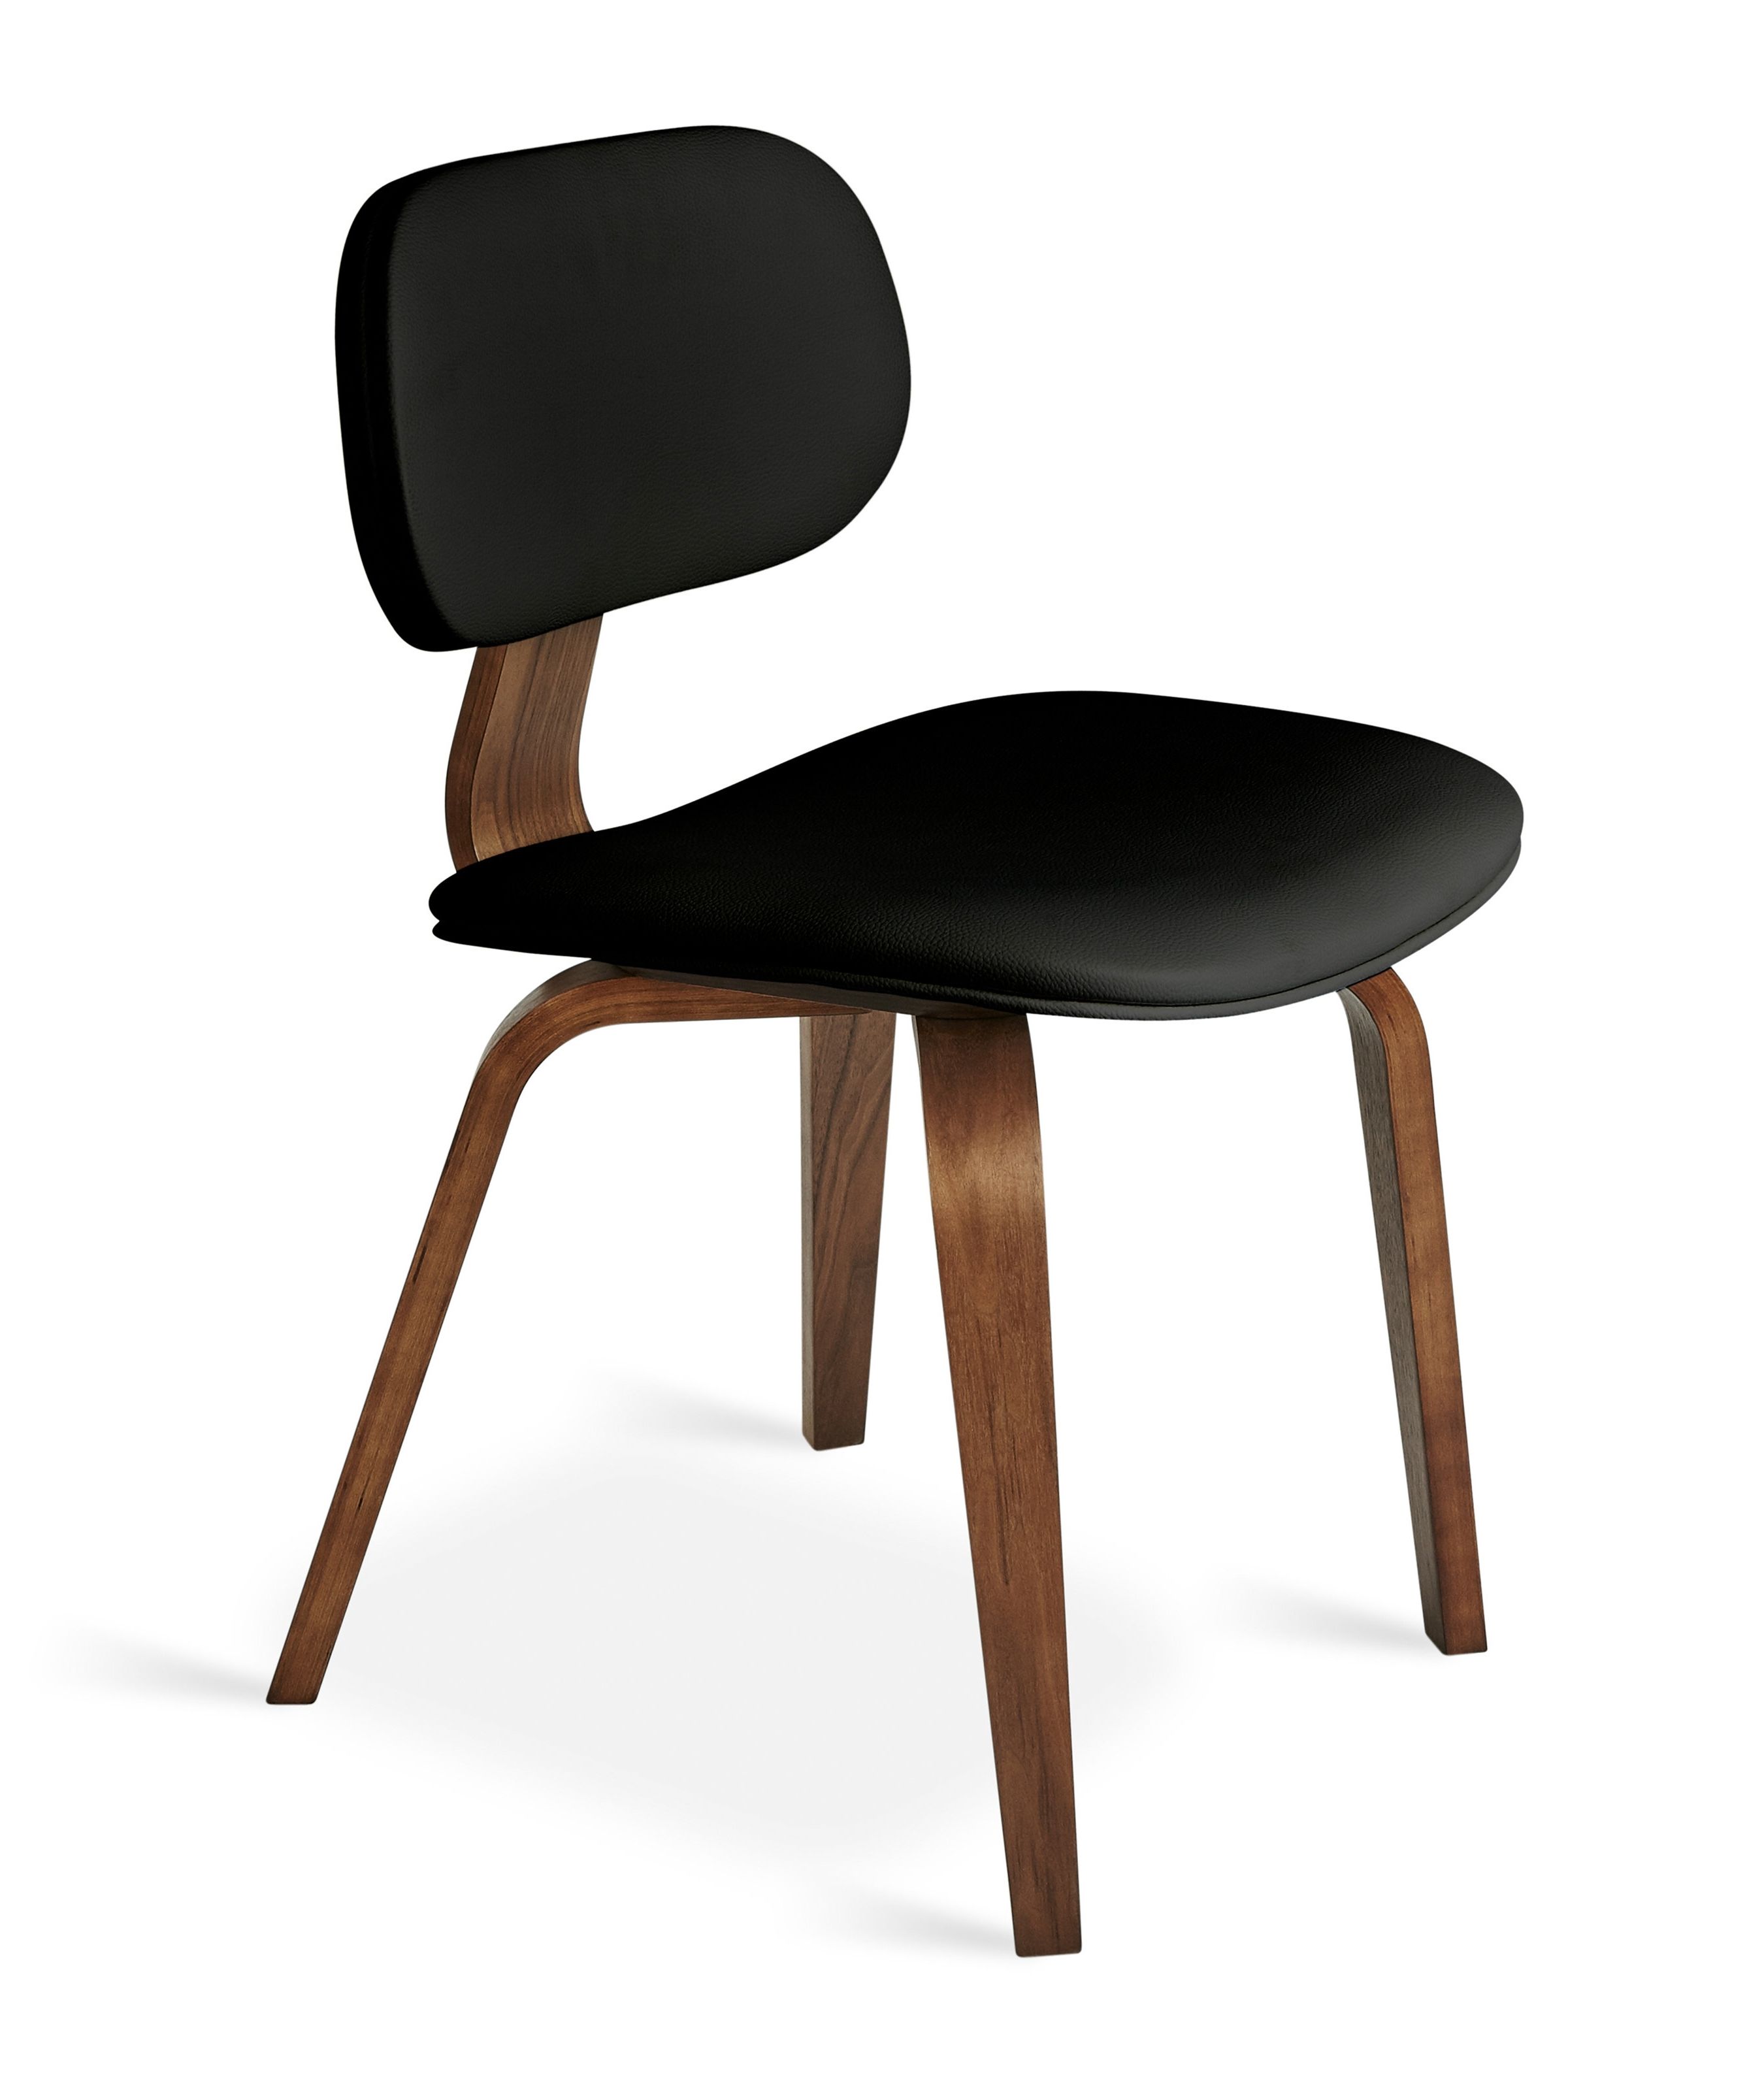 Clint Side Chairs Within Recent Thompson Side Chair & Reviews (View 4 of 20)